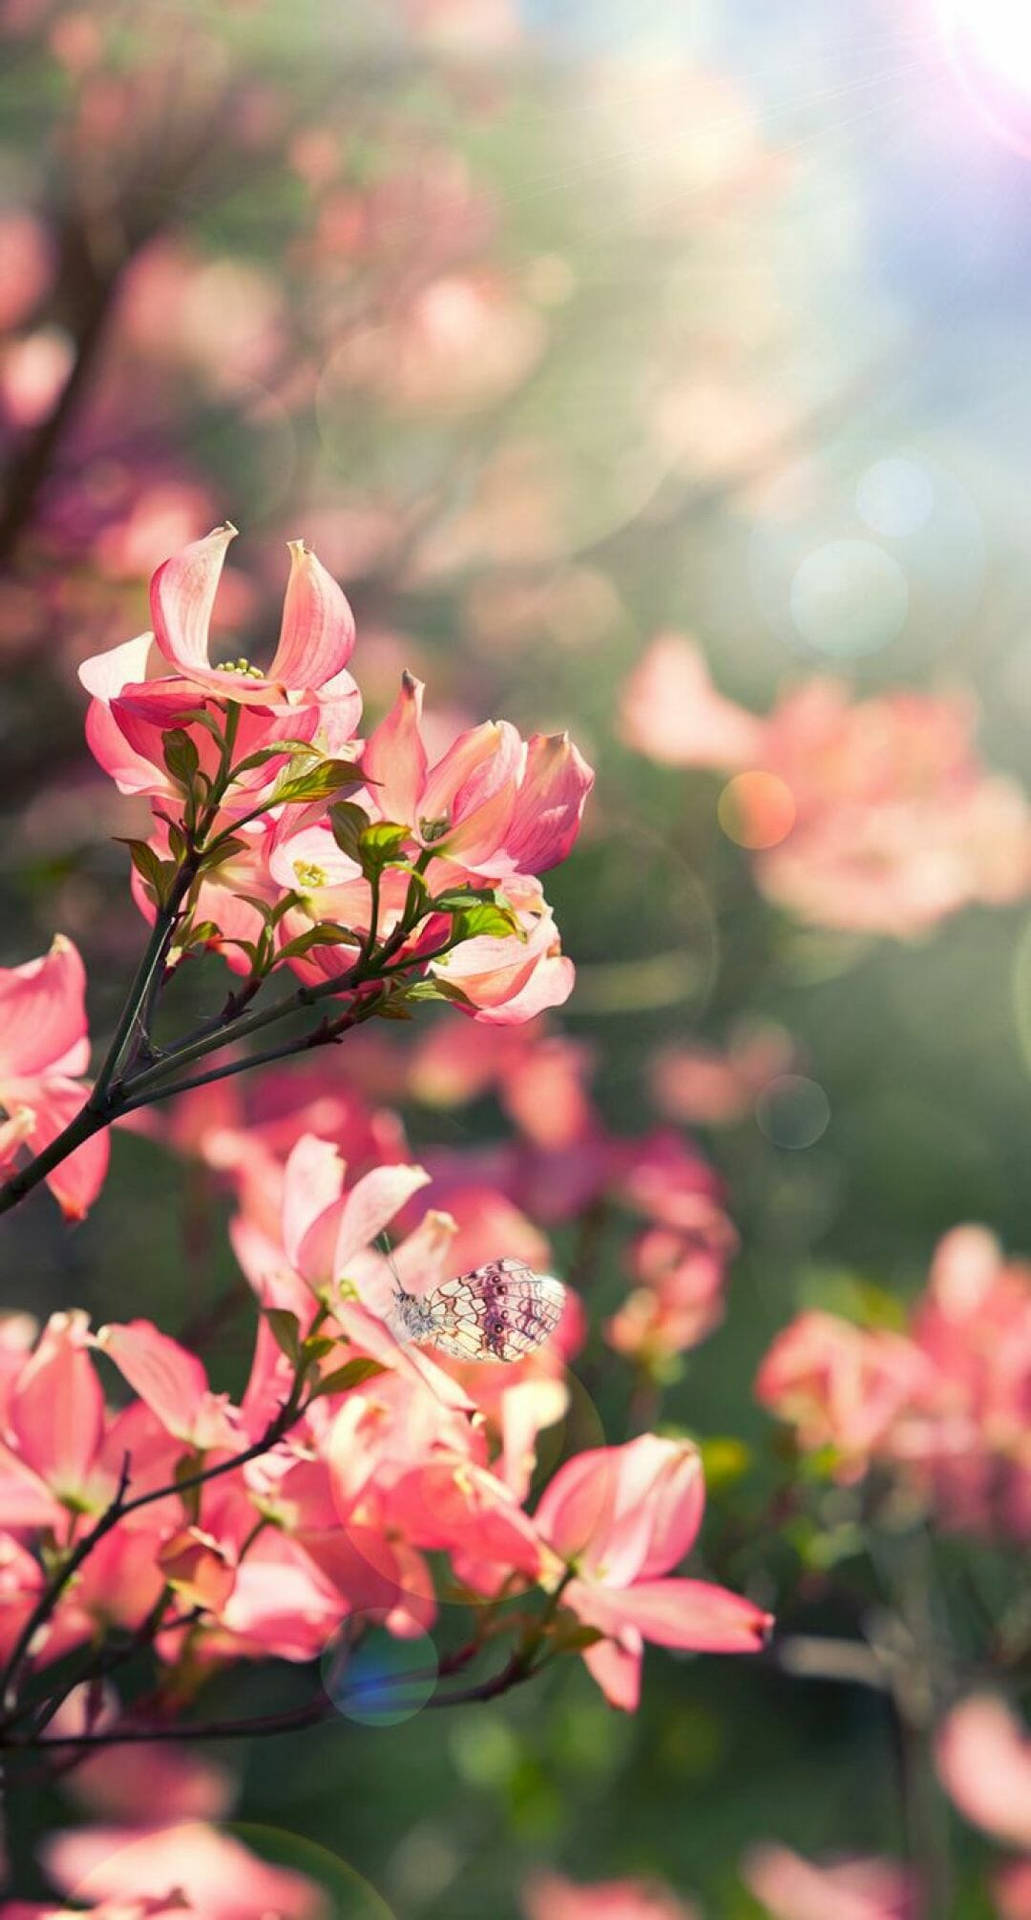 Bring the energy of Spring with this beautiful flower iPhone wallpaper! Wallpaper